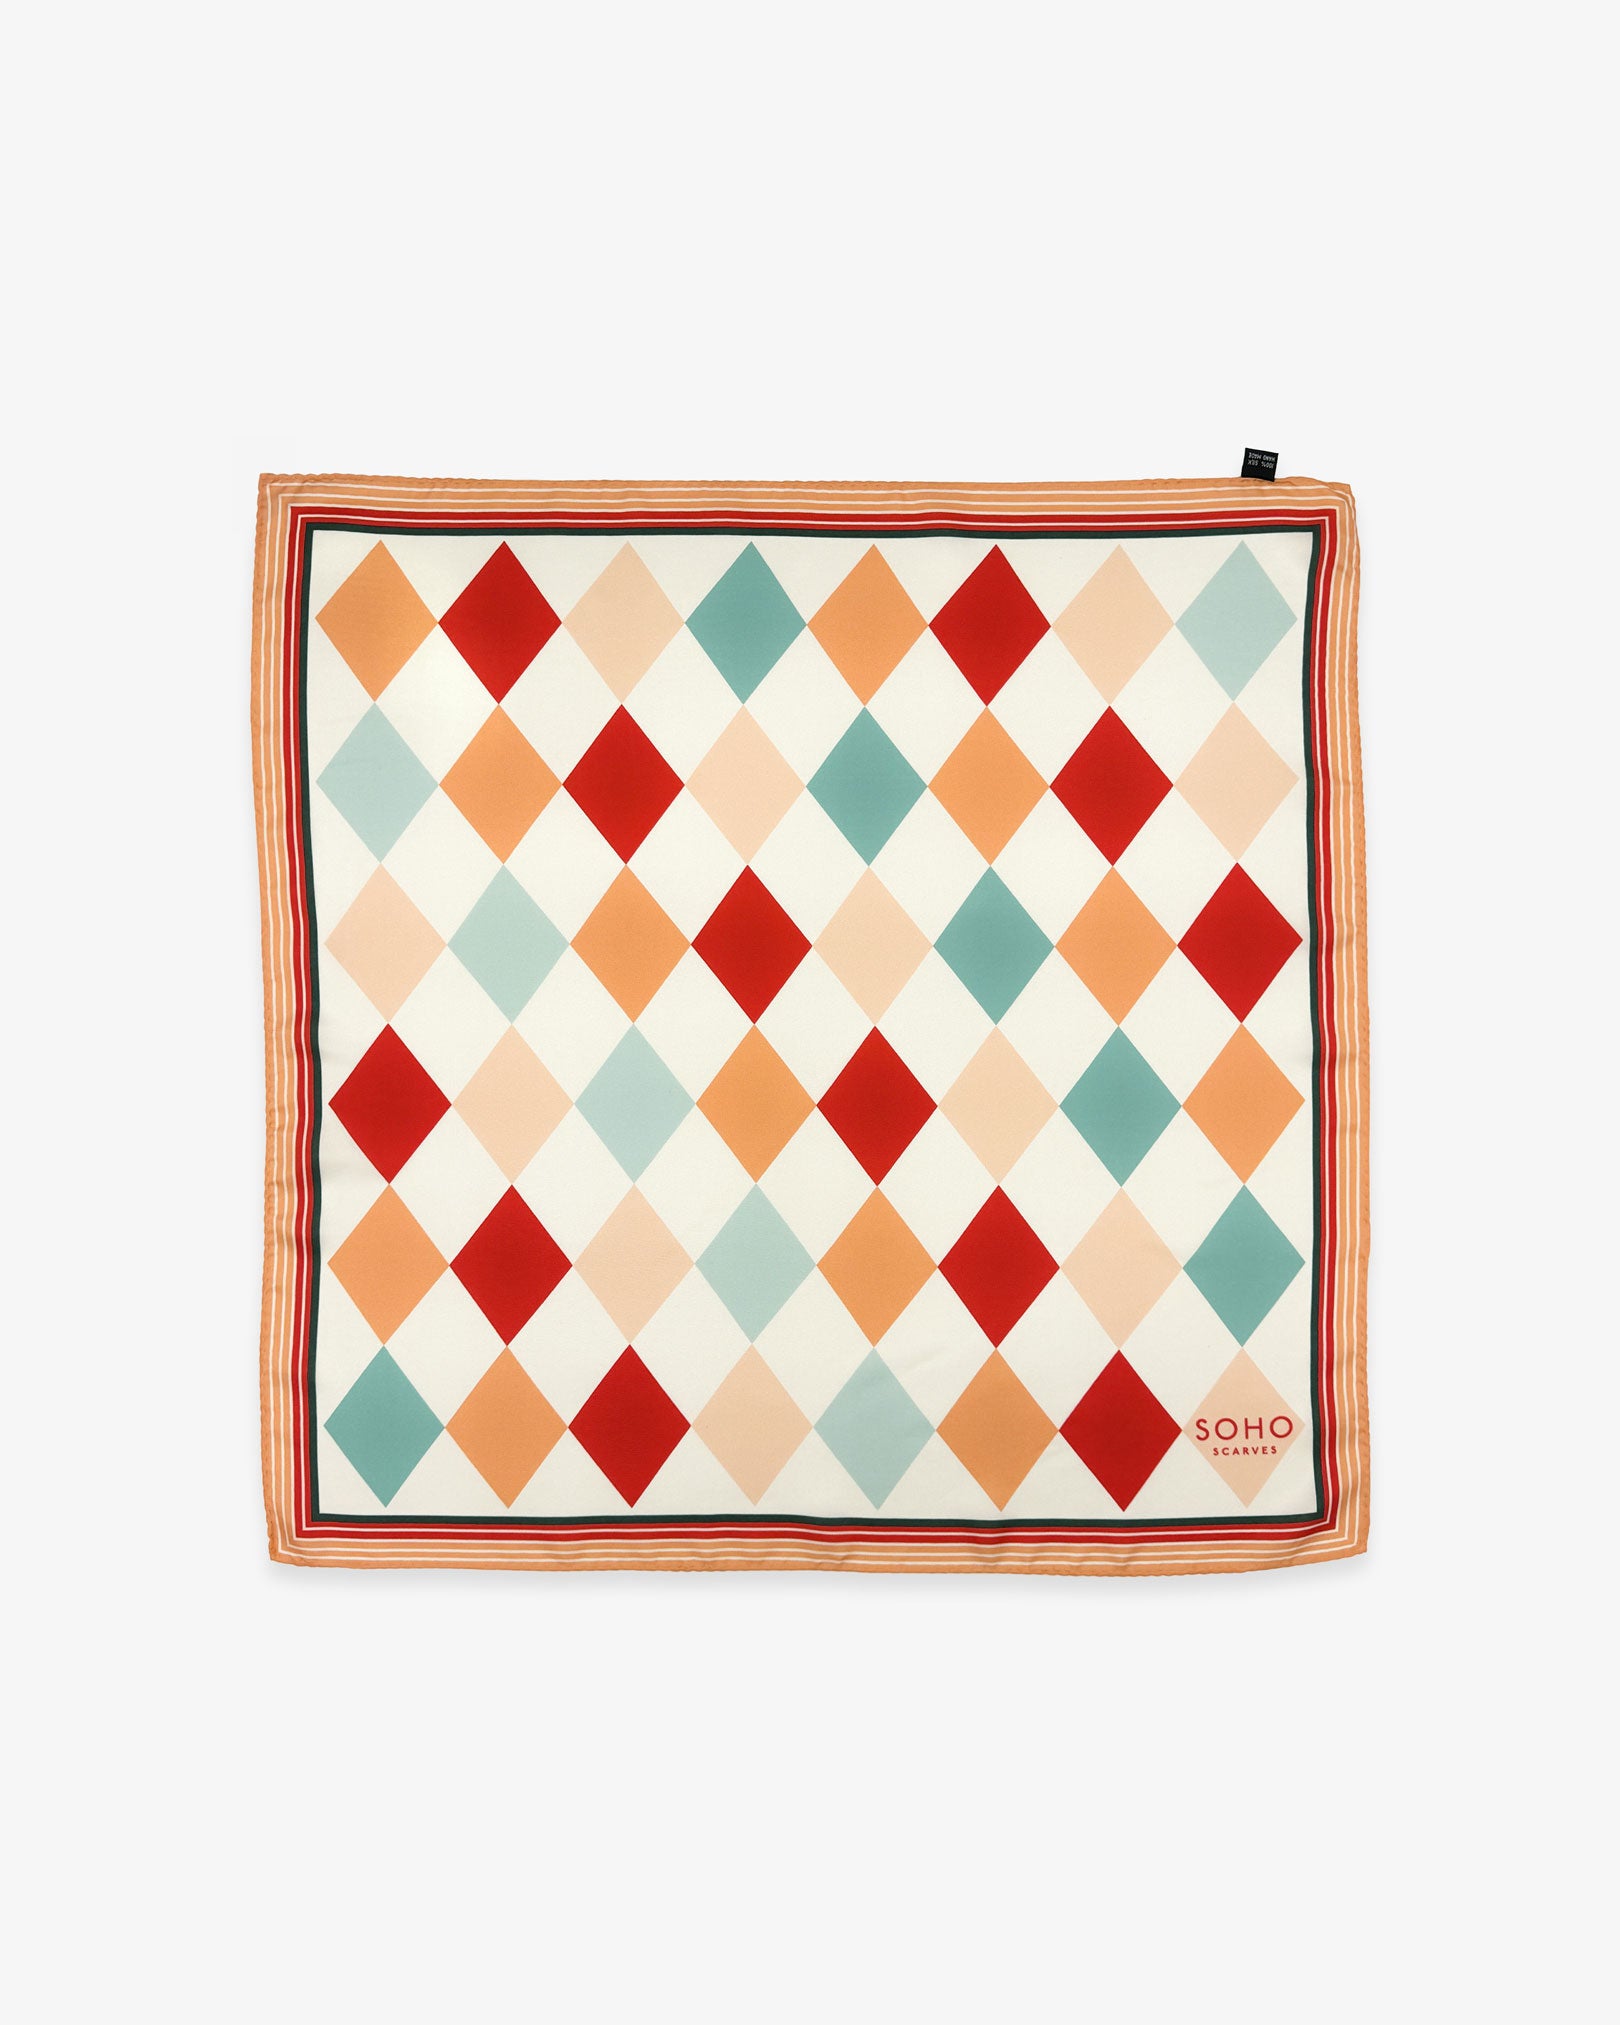 Fully unfolded 'Diamonds' silk pocket square, showing the teal, red, orange and pink diamond repeat pattern with a concentric orange and red border.